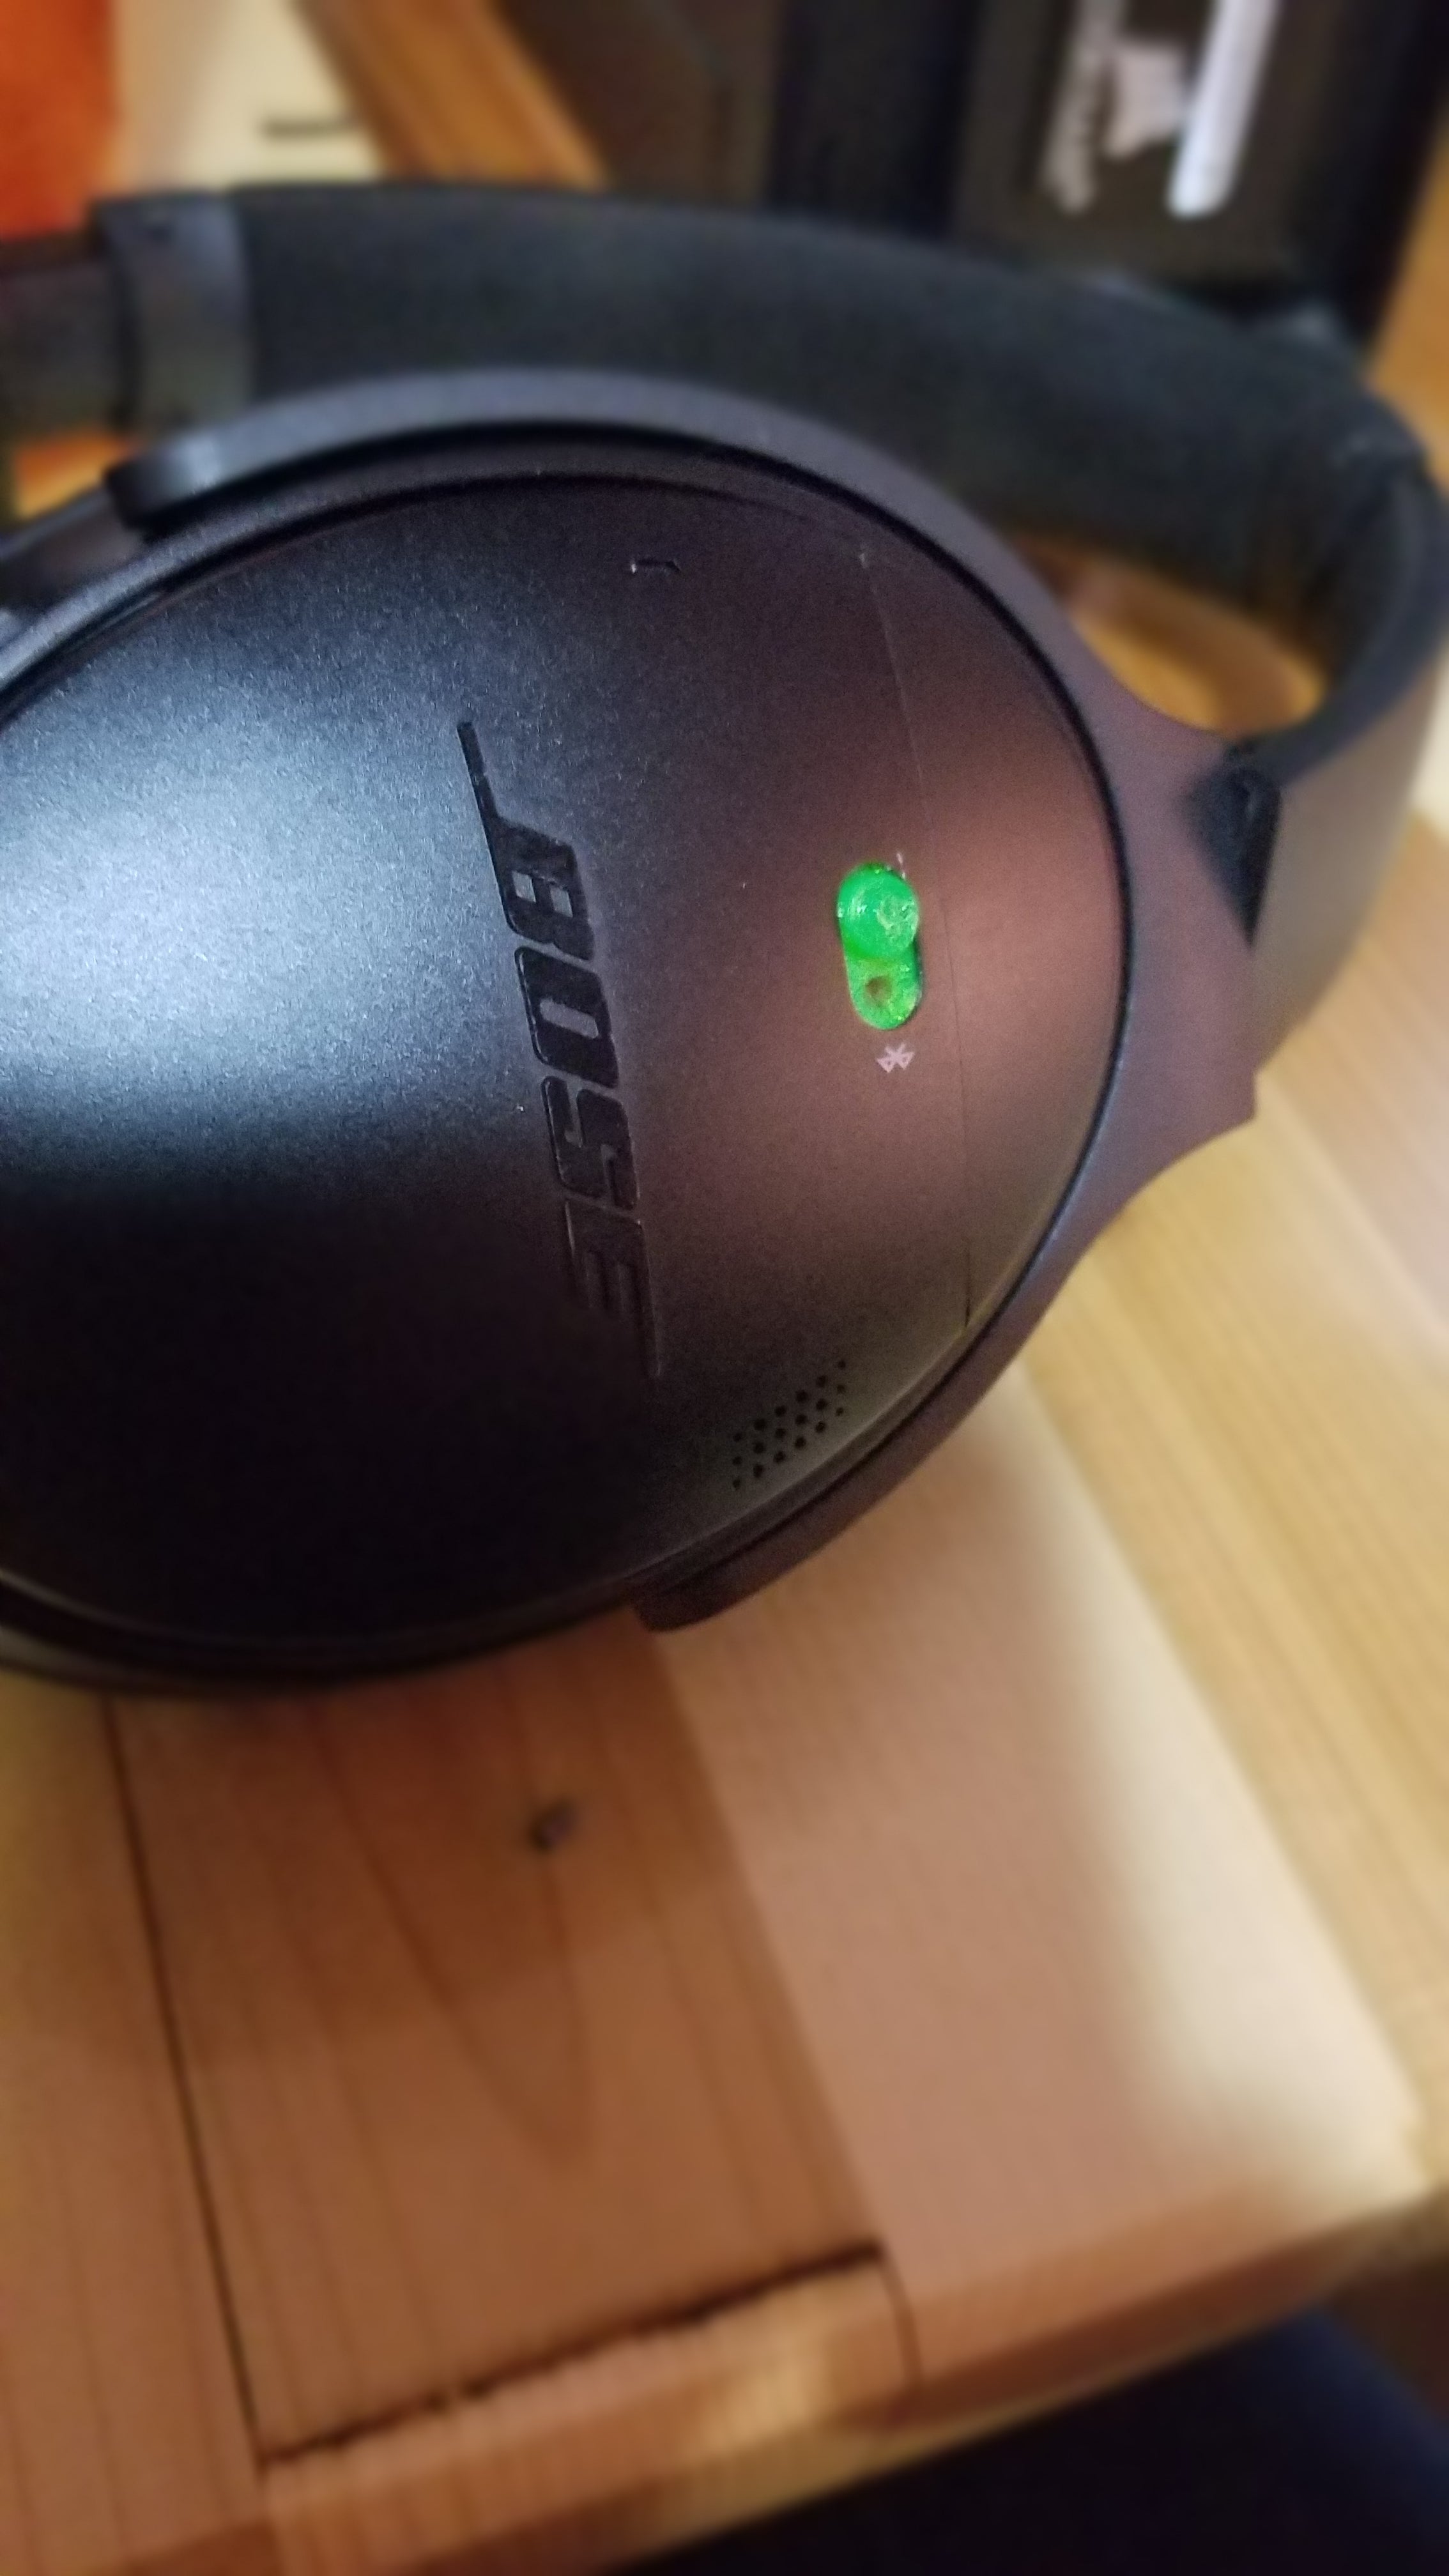 On switch for Bose QuietComfort 35